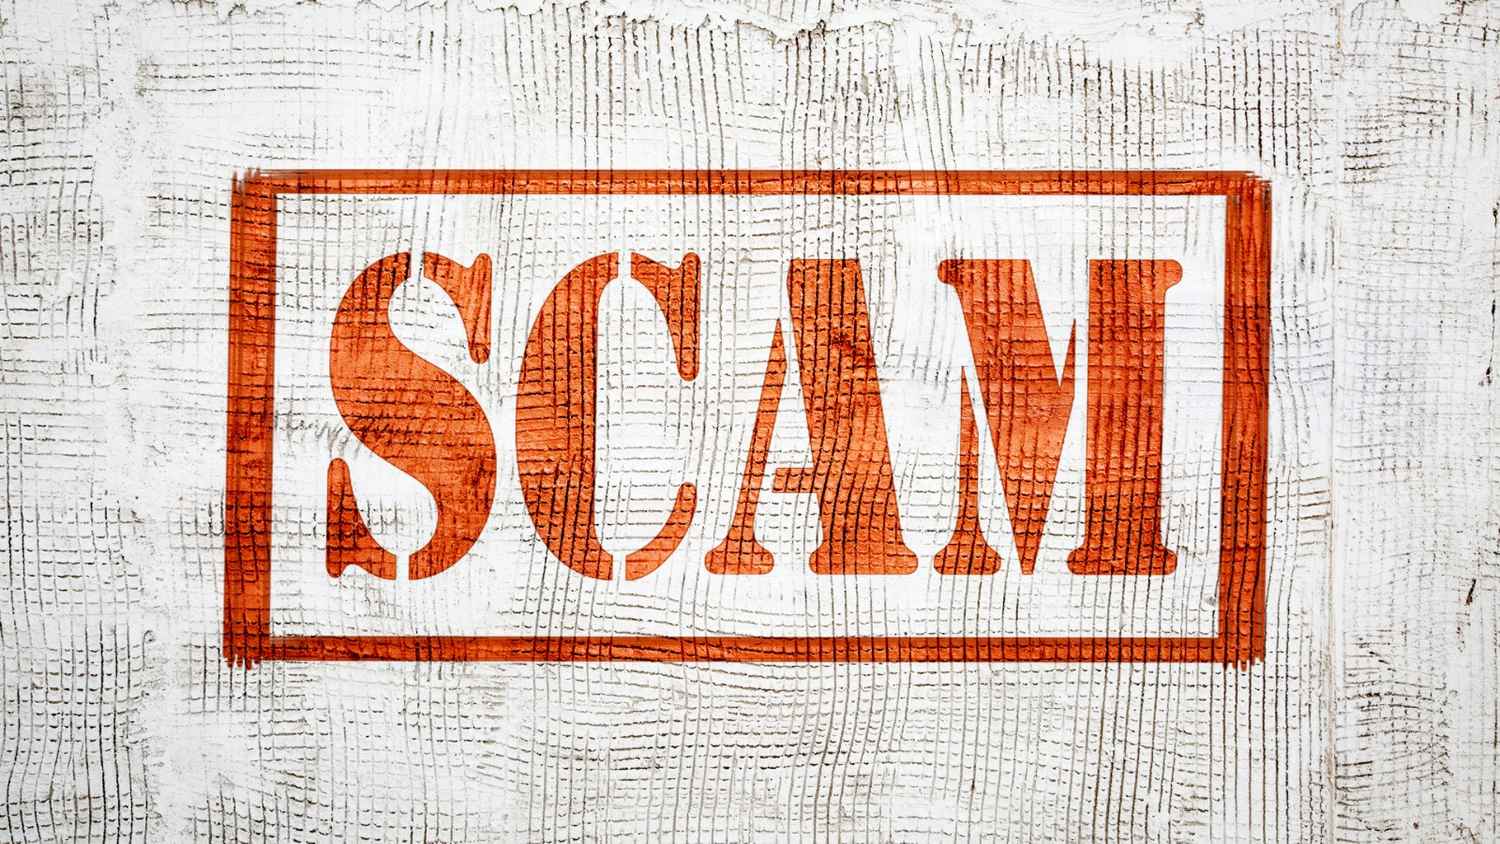 Pancard Scam Alert! How to Spot and Protect Yourself from this fraud